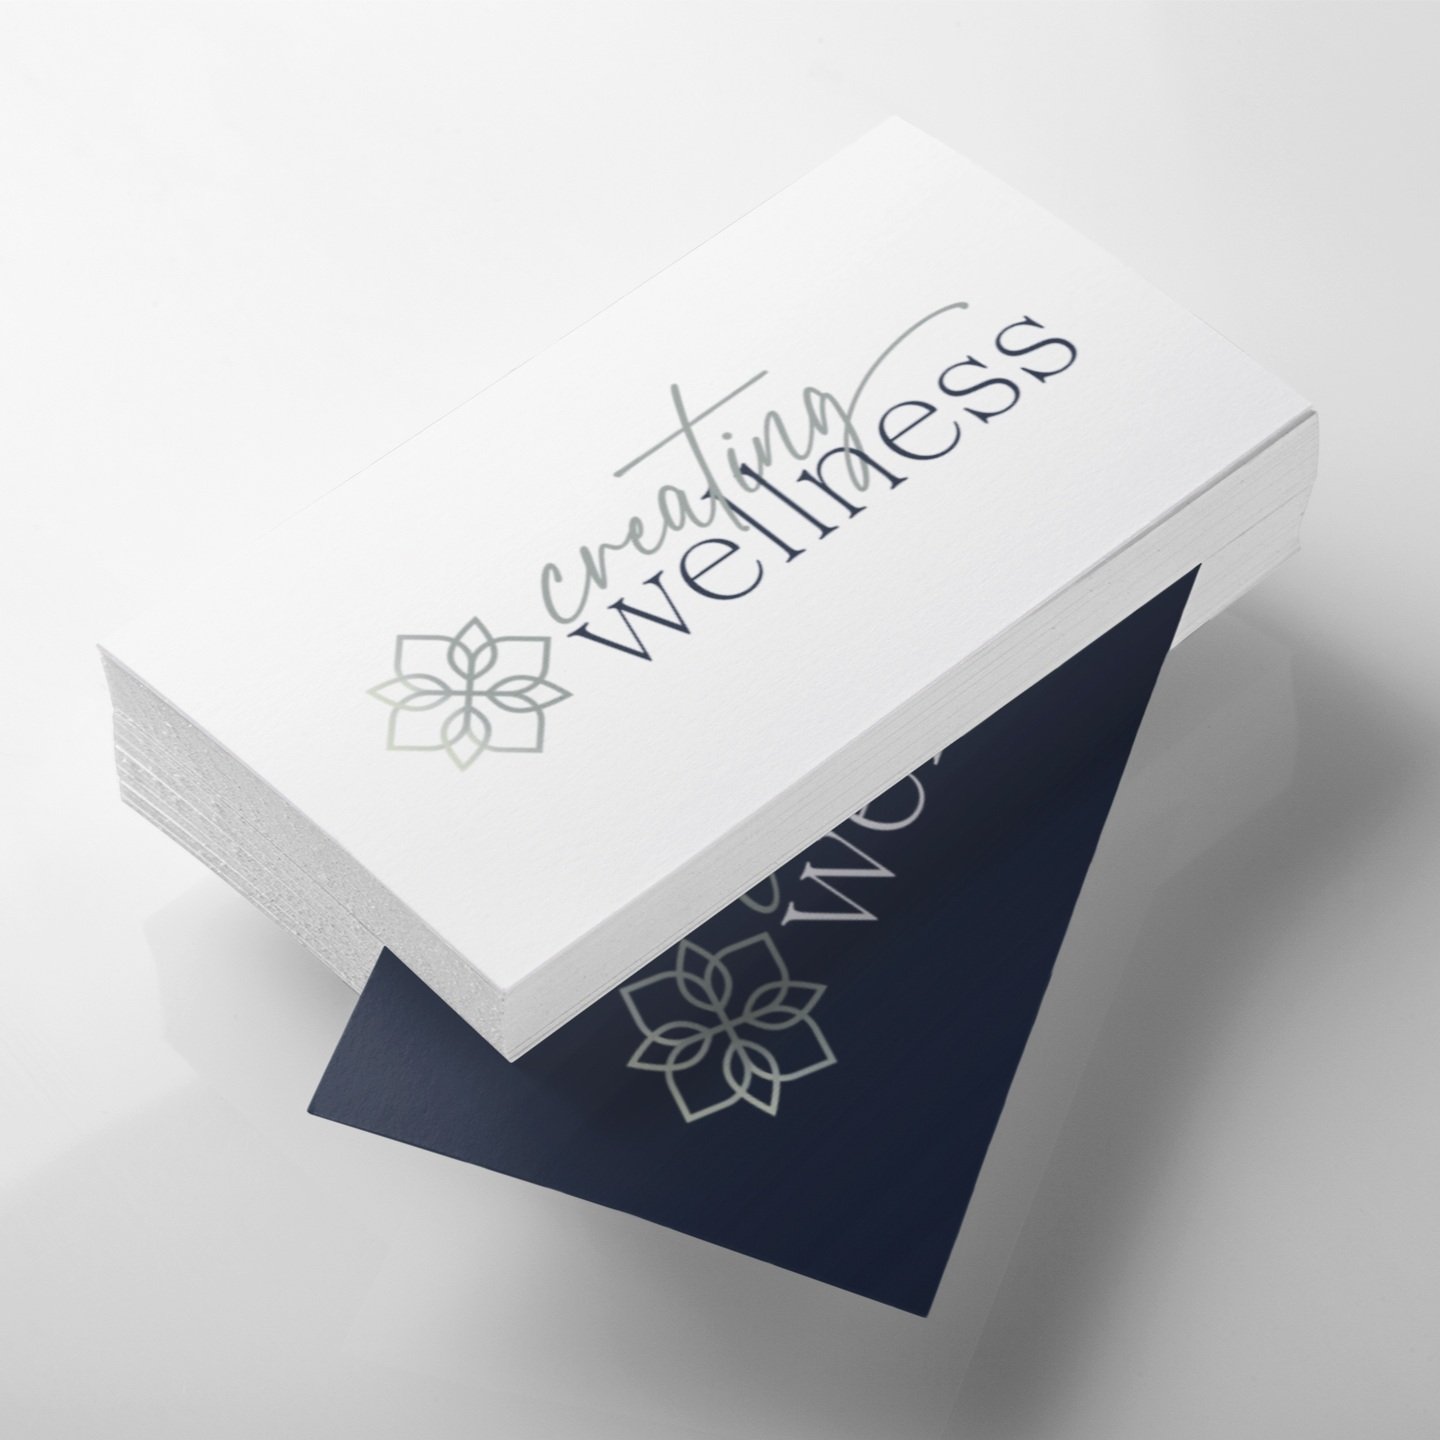 mockup-featuring-a-stack-of-business-cards-lying-over-a-smooth-surface-a6303+%281%29.jpg